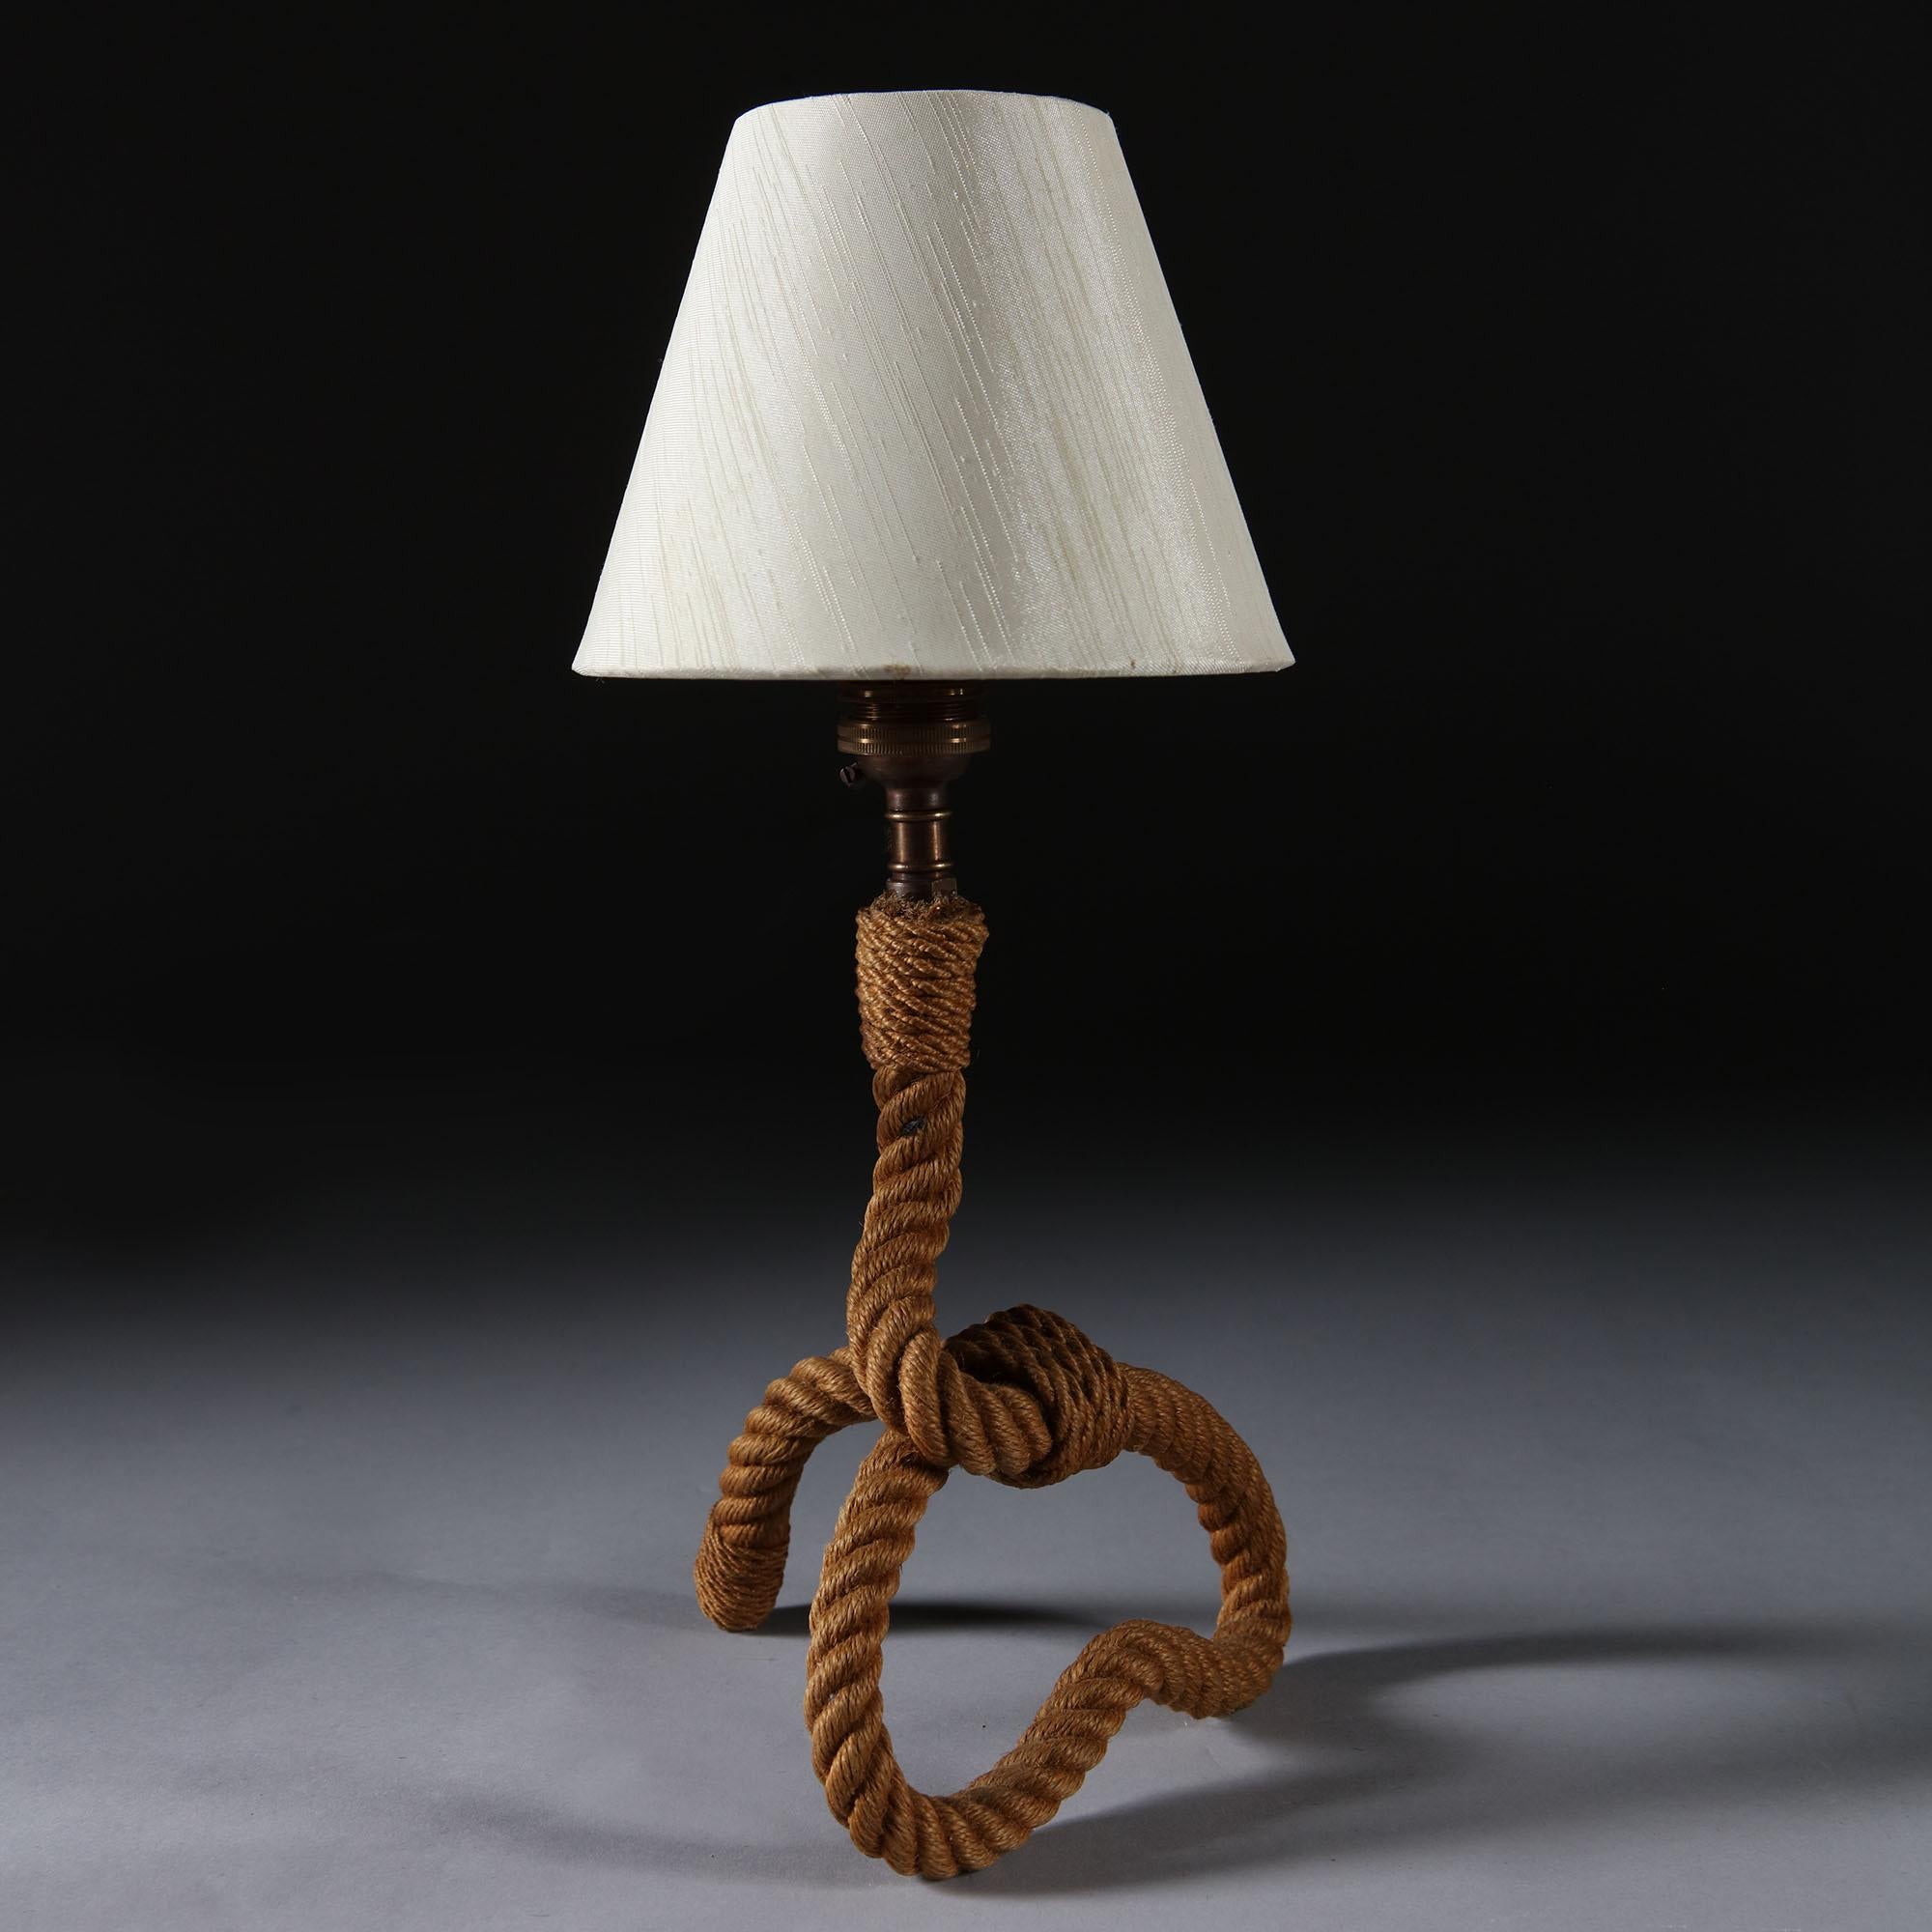 French Small Mid 20th Century Rope Twist Table Lamp Attributed to Audoux-Minet